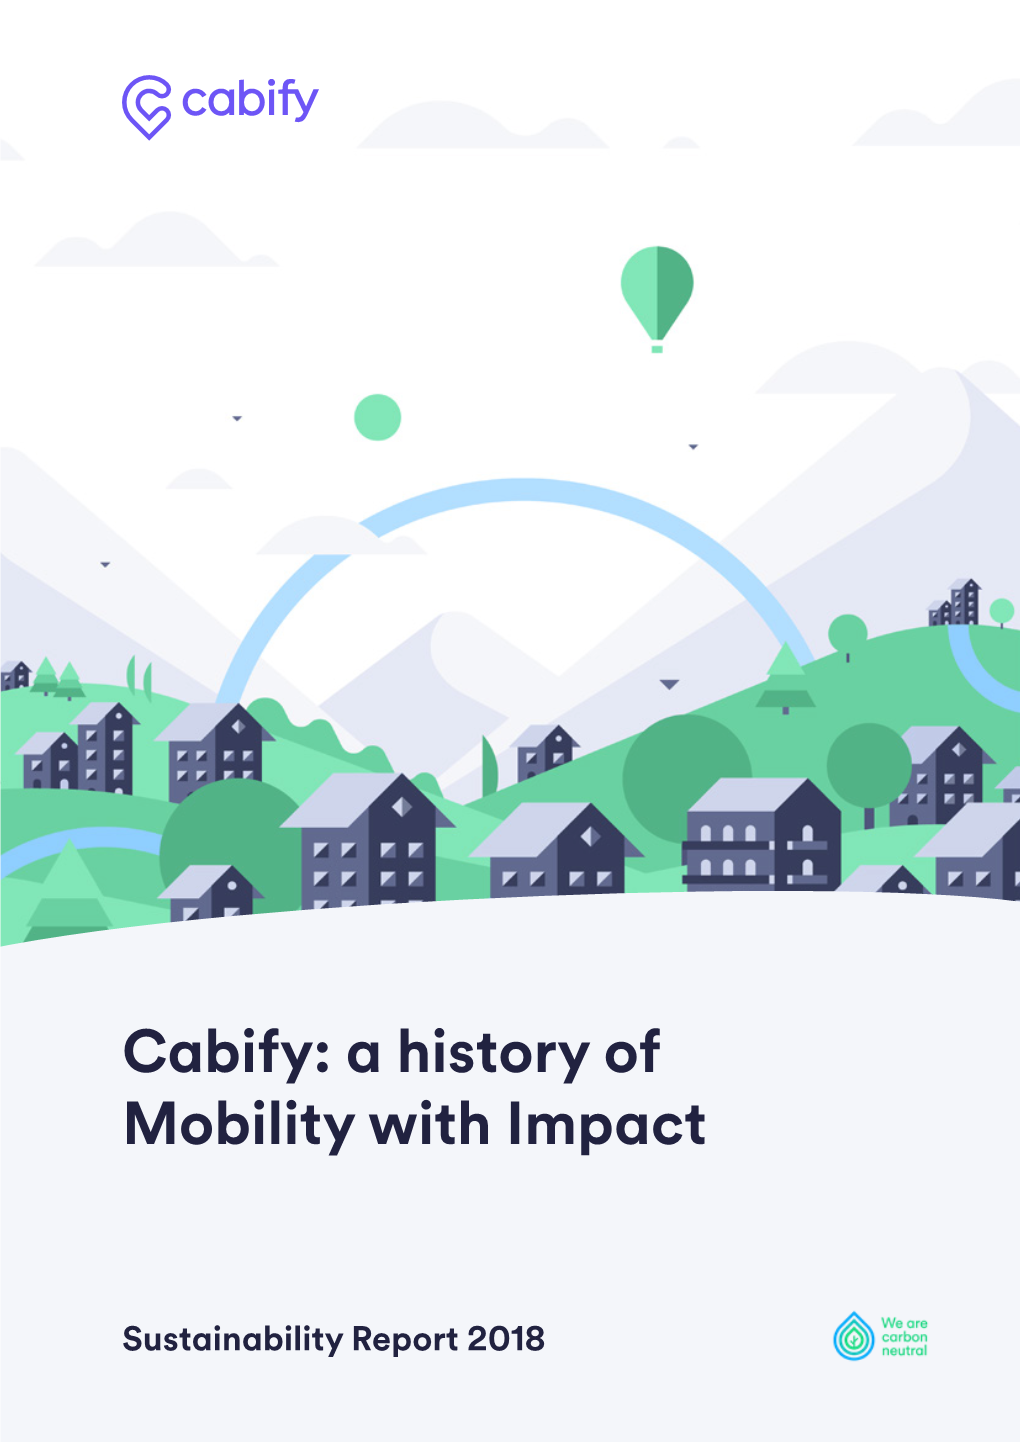 Cabify: a History of Mobility with Impact